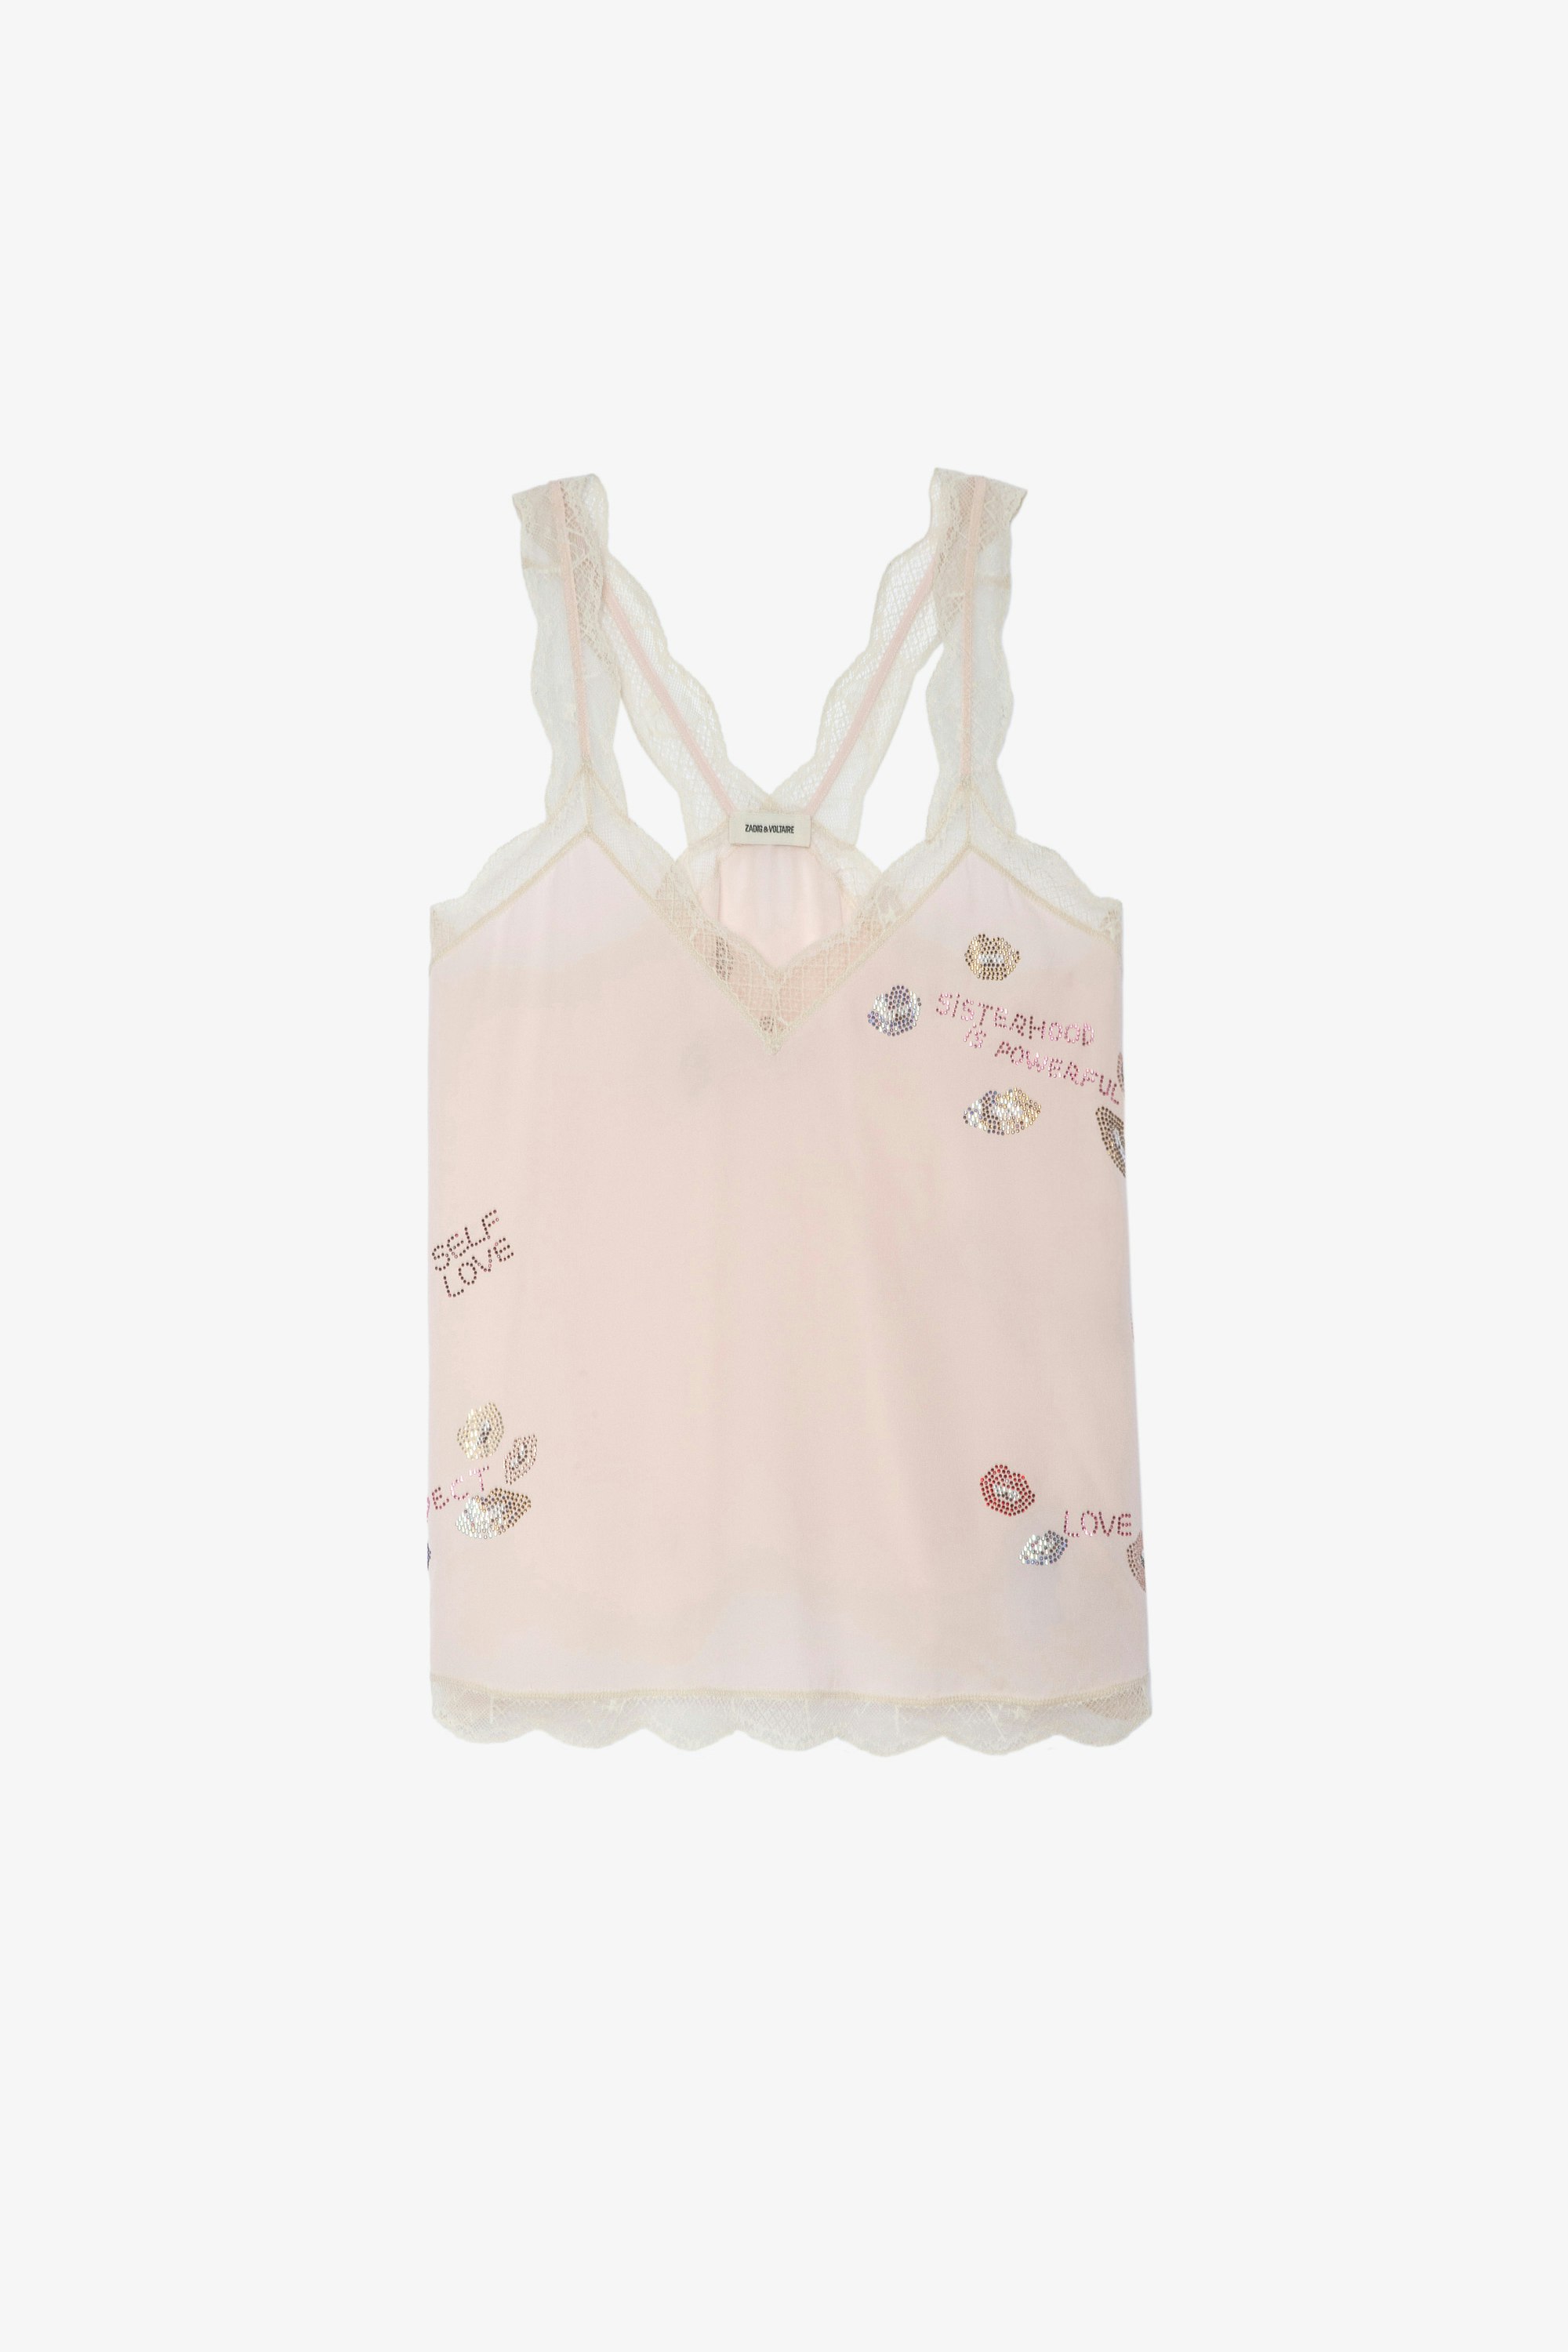 Band of Sisters シルク Chou キャミソール Women’s ecru silk and lace camisole with Band of Sisters crystals